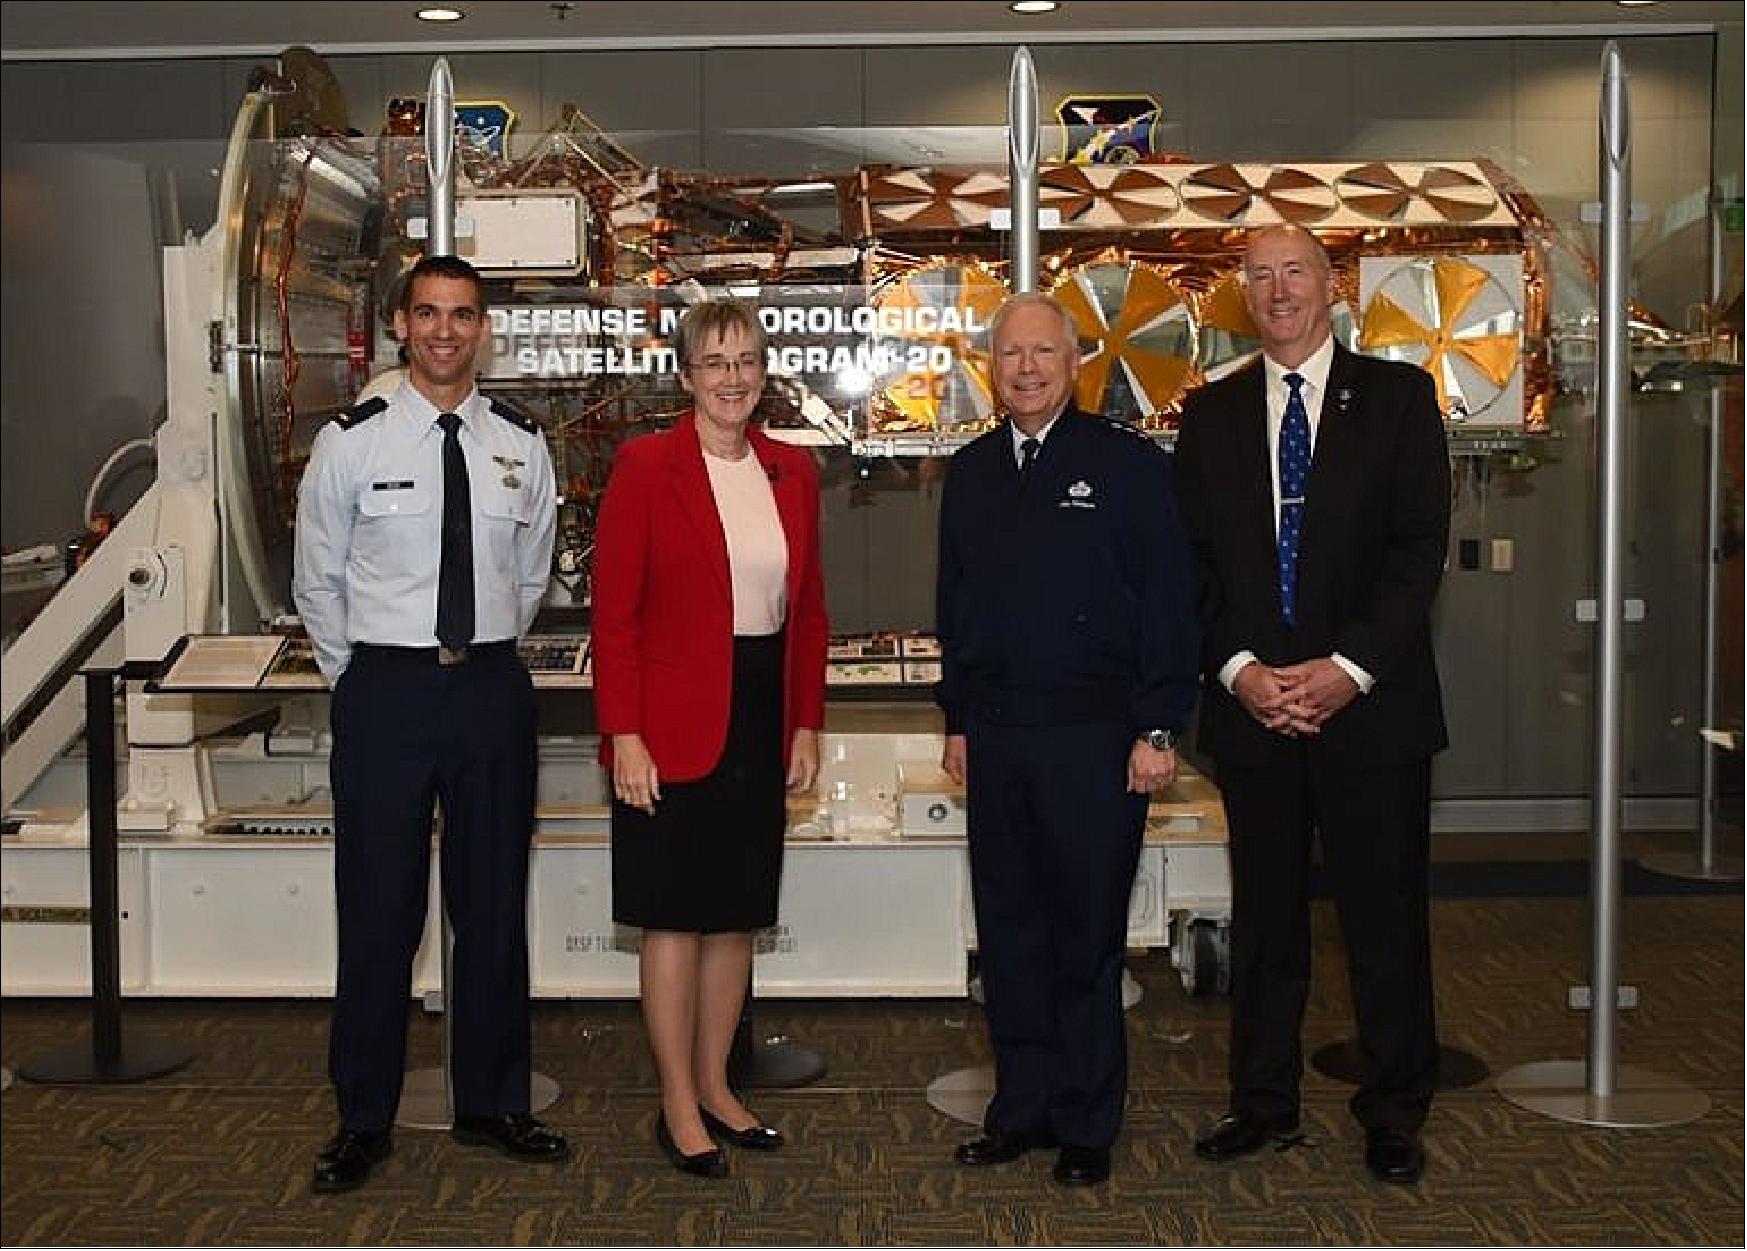 Figure 33: Secretary of the Air Force Heather Wilson and Air Force Lt. Gen. John Thompson, commander of the Space and Missile Systems Center and Program Executive Officer for Space, pose for a photo with Air Force 2nd Lt Zachary Nuss, far left, and Dr. Steven Pluntze, far right, in front of a decommissioned Defense Meteorological Satellite Program 20 satellite during the Space and Missile Systems Center's lecture series, Airmen Everywhere, at Los Angeles Air Force Base in El Segundo, Calif., Dec. 14, 2017. DMSP-20, was dismantled and put in a museum instead of launched (image credit: U.S. Air Force photo/Sarah Corrice)